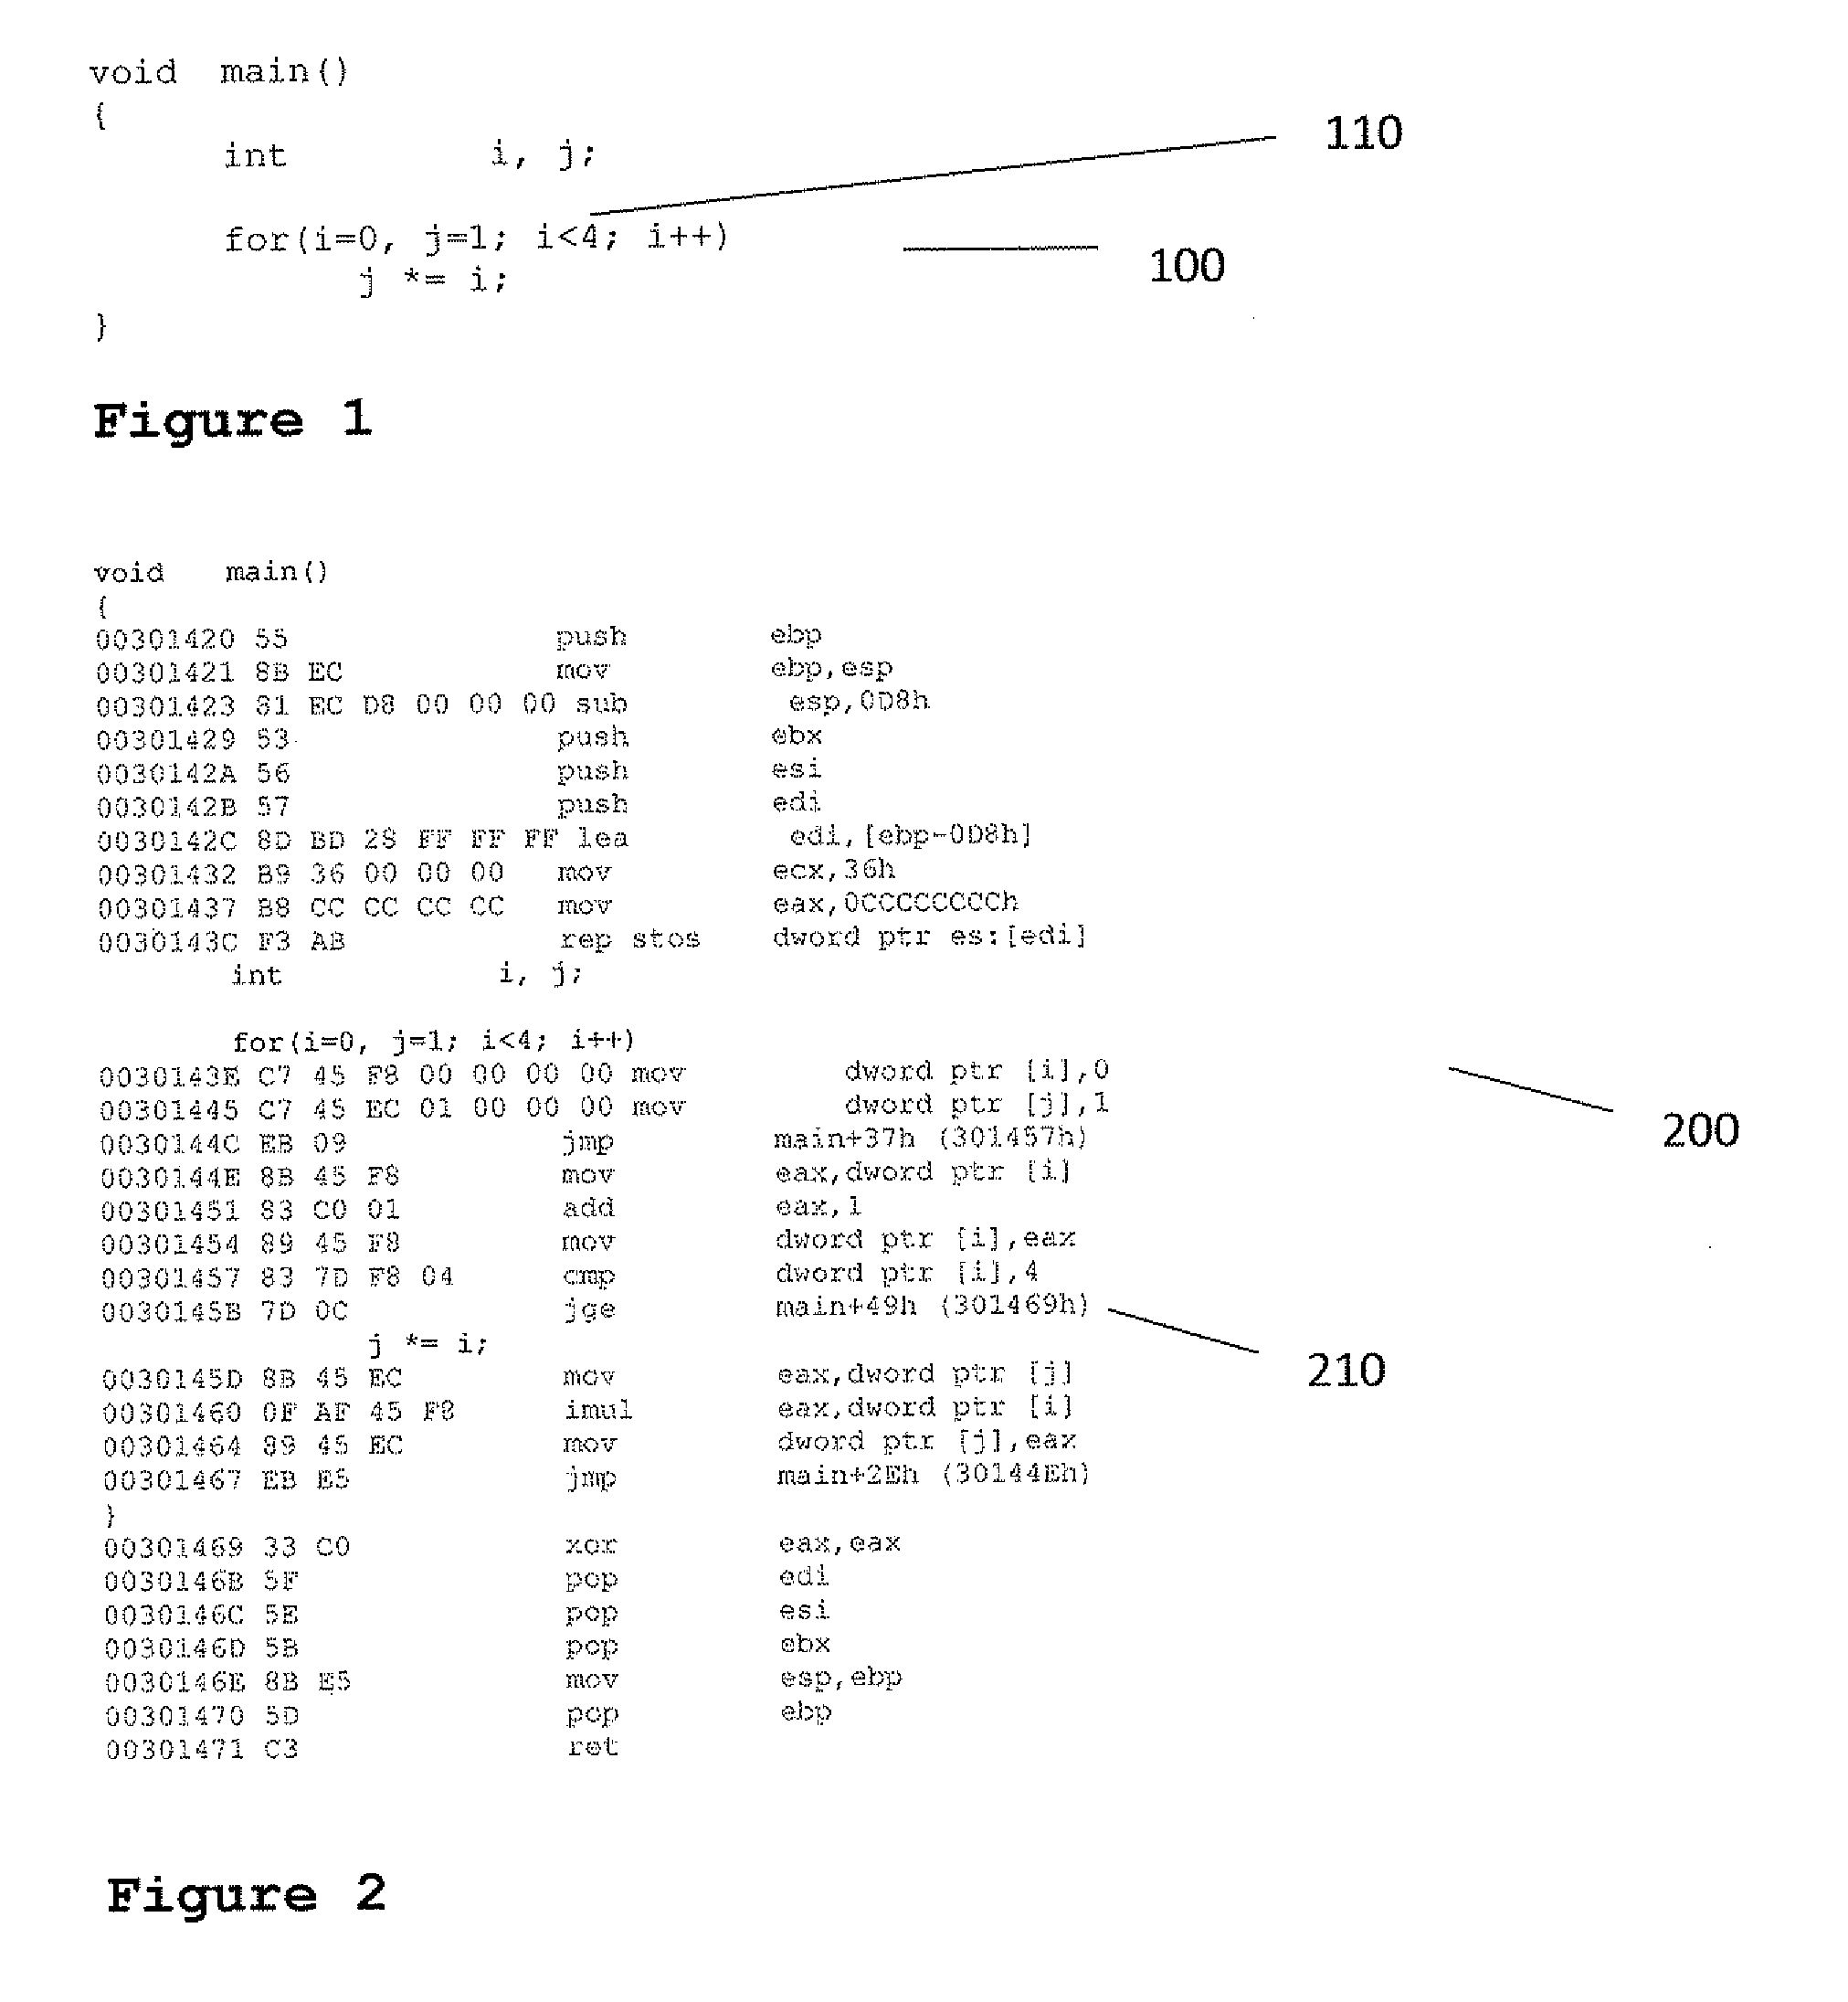 Efficient recording and replaying of the execution path of a computer program